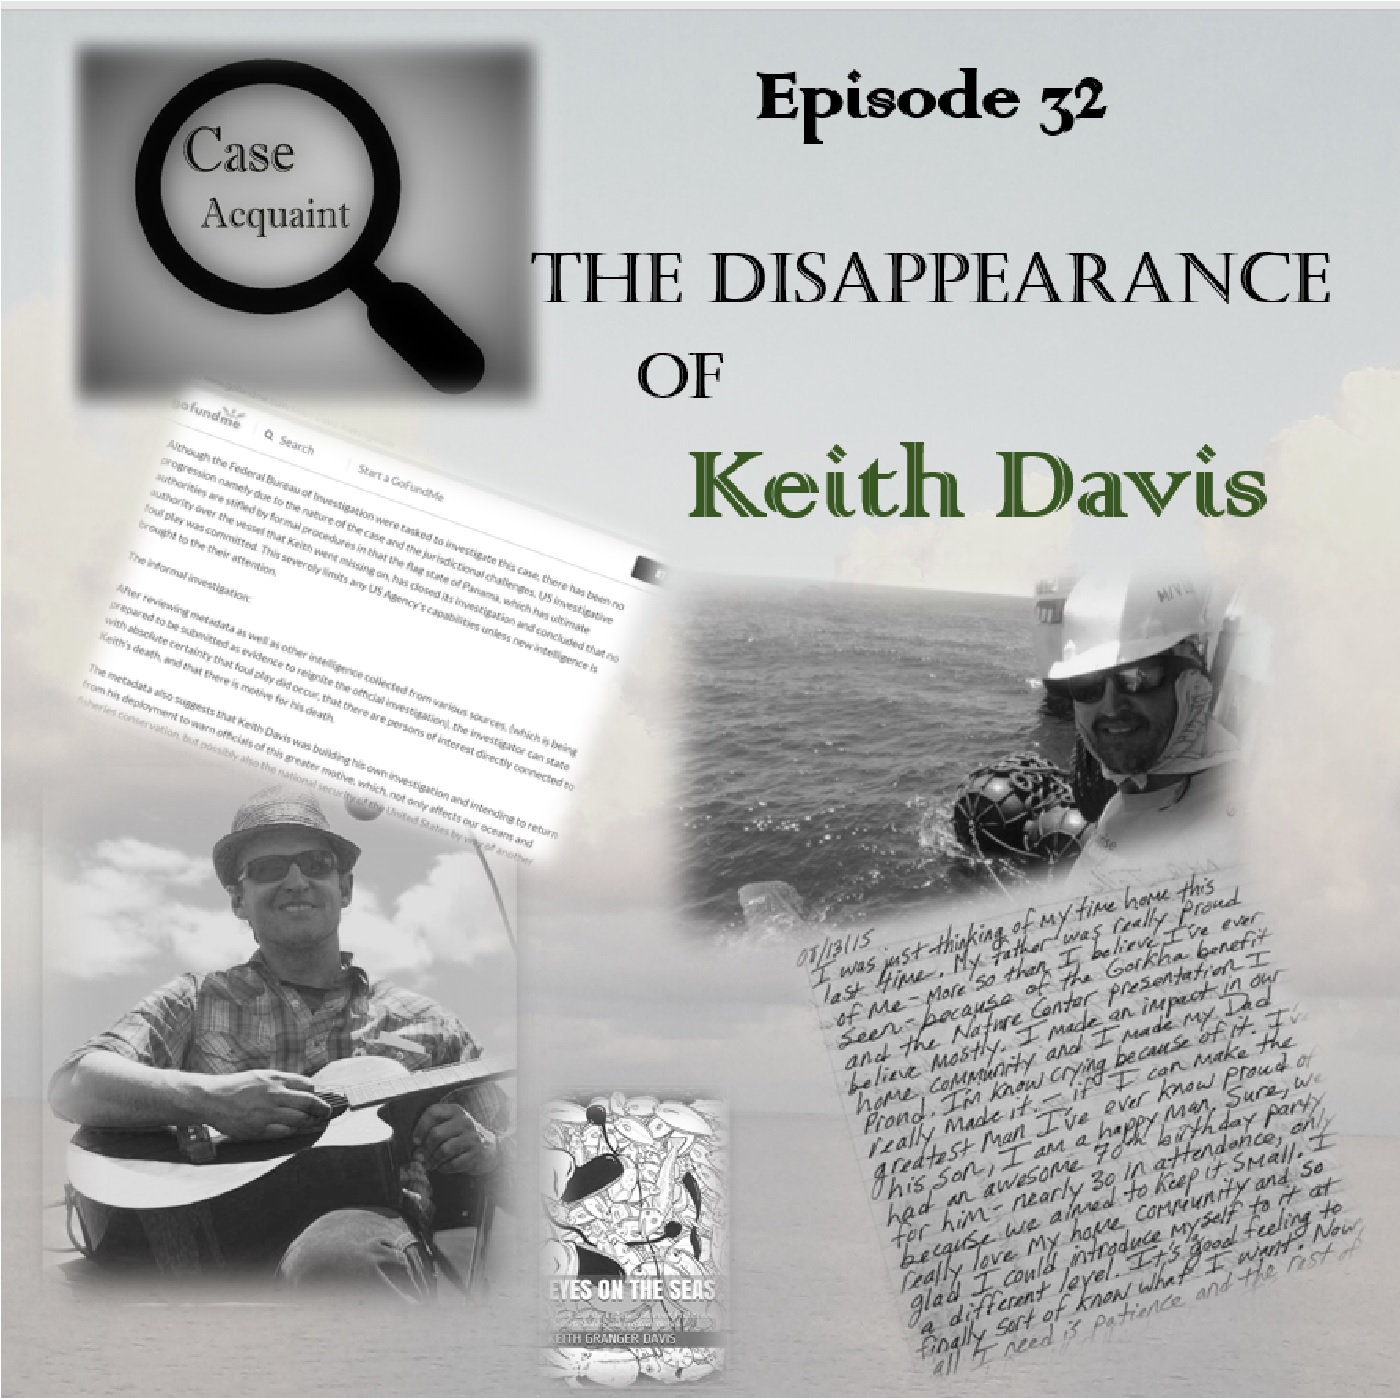 Episode 32 The Disappearance of Keith Davis